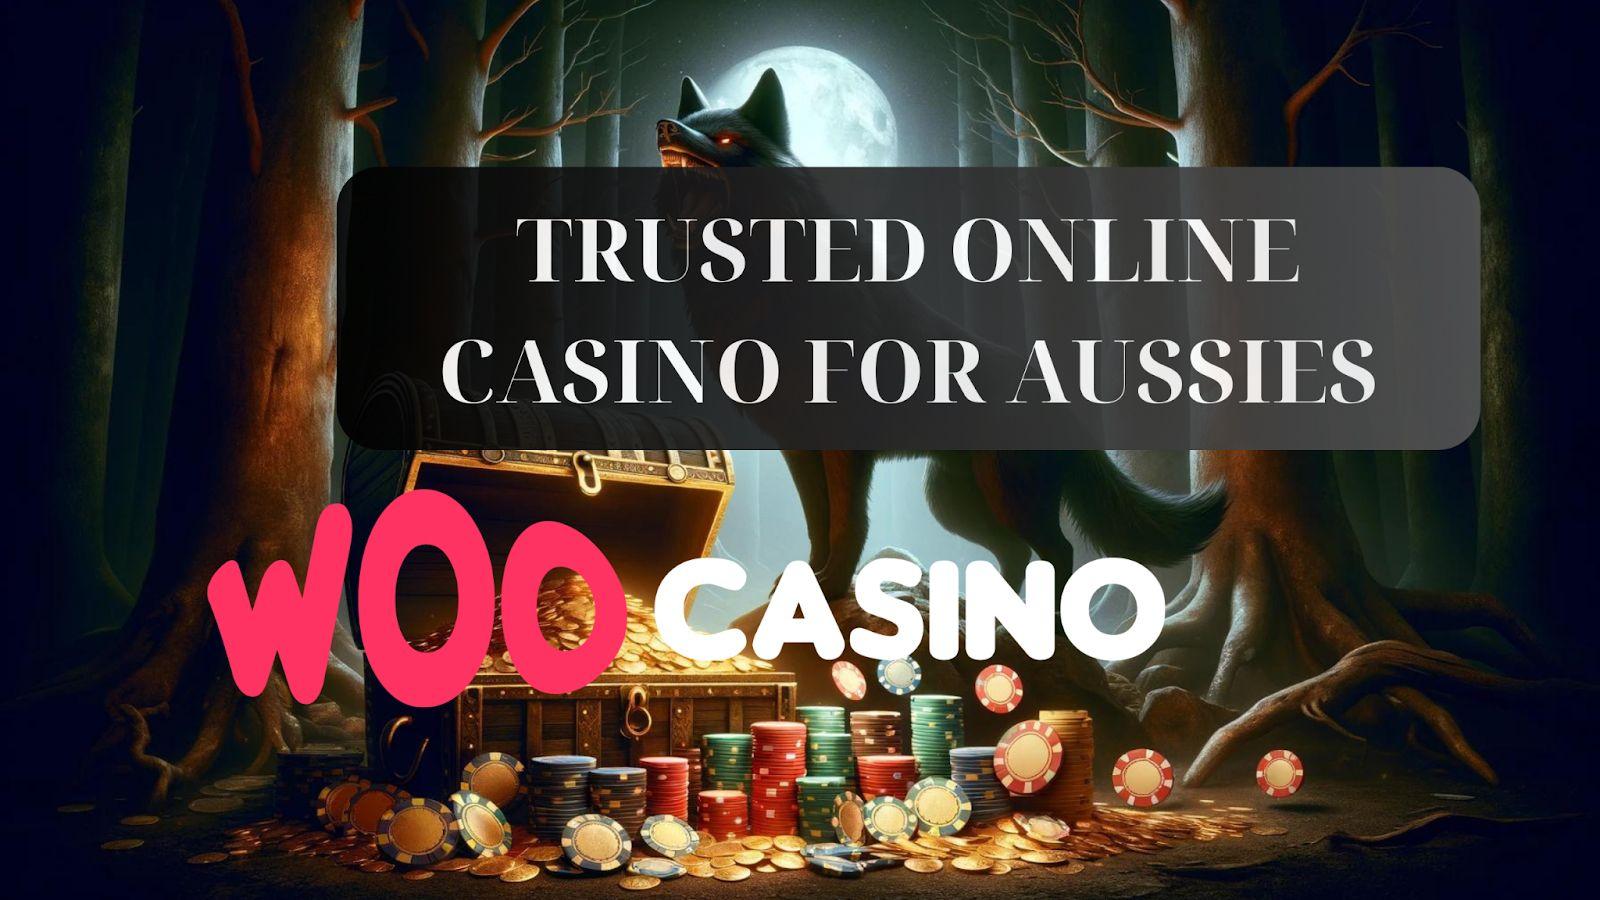 Woo Casino - The Trusted Choice for Australians